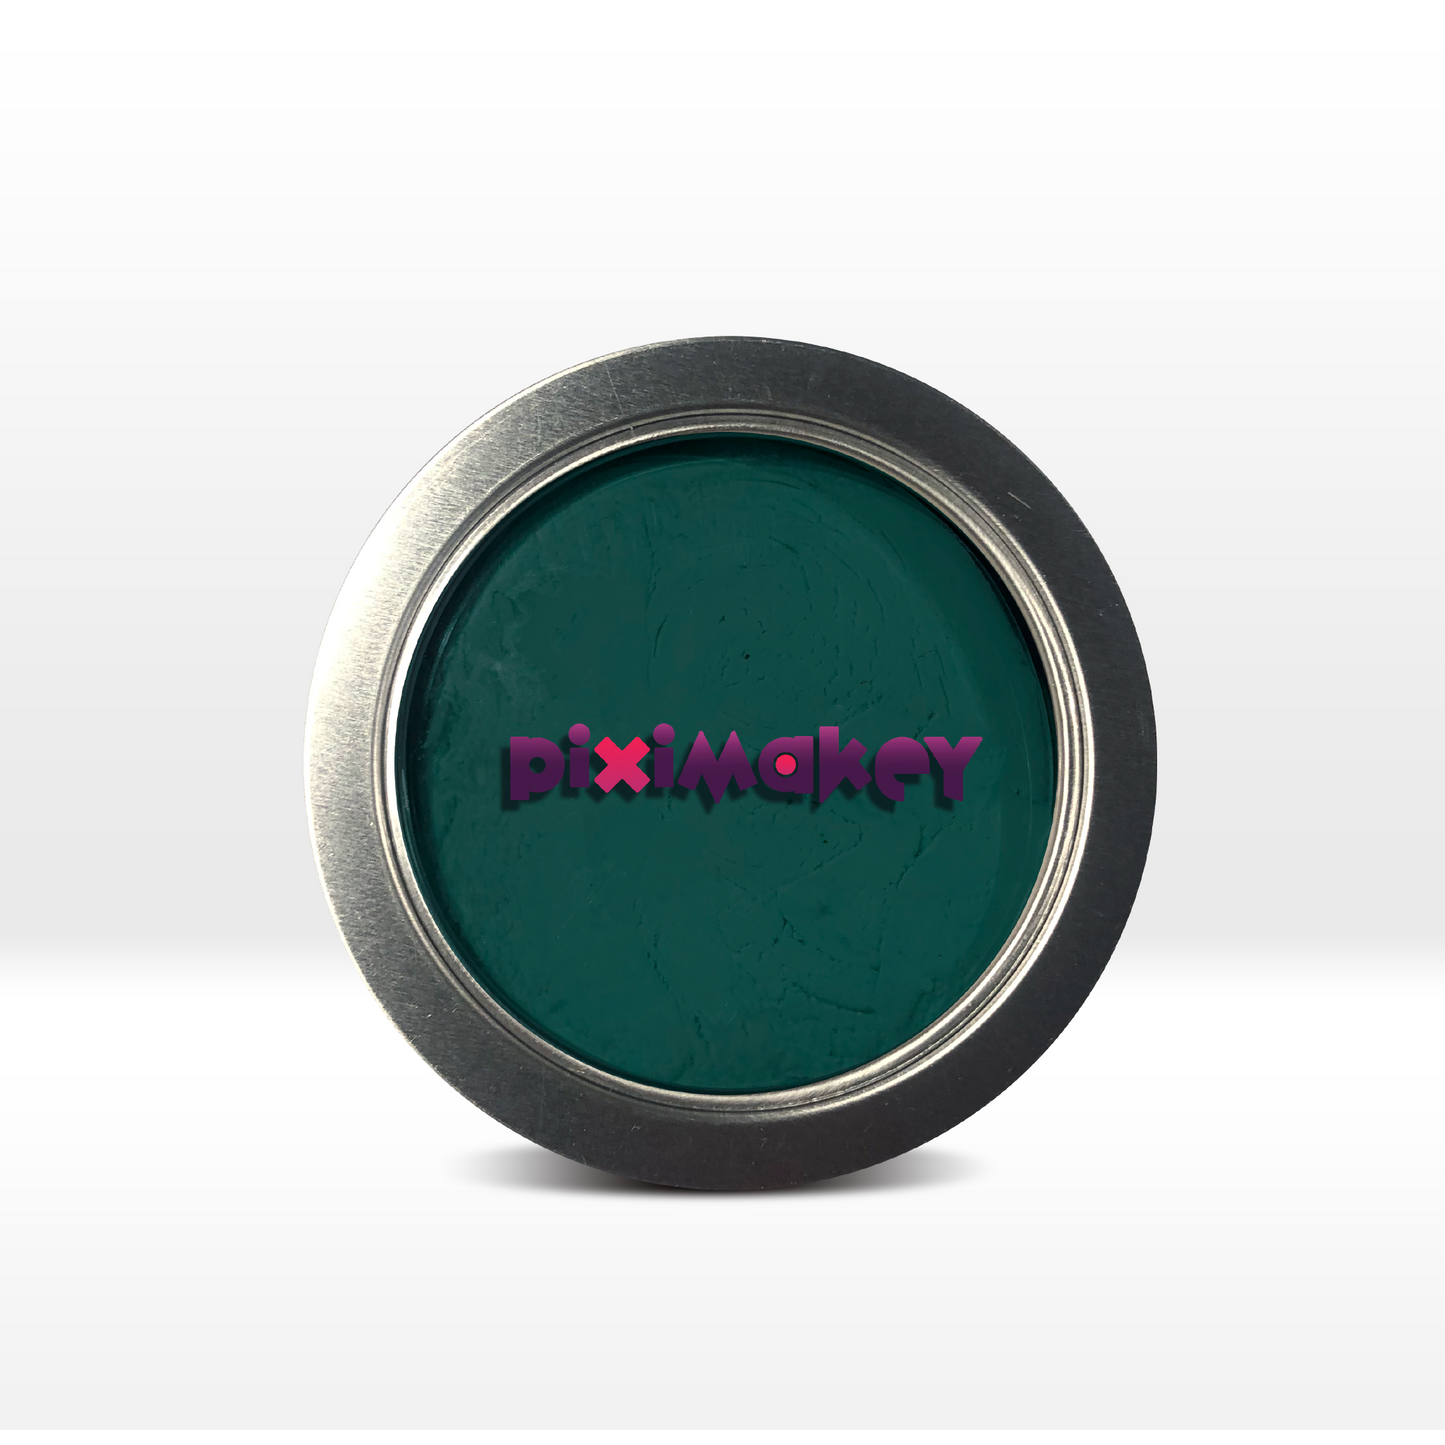 Piximakey Animation Clay  (Pixi Grass), Tin Can with 150g Animation Clay